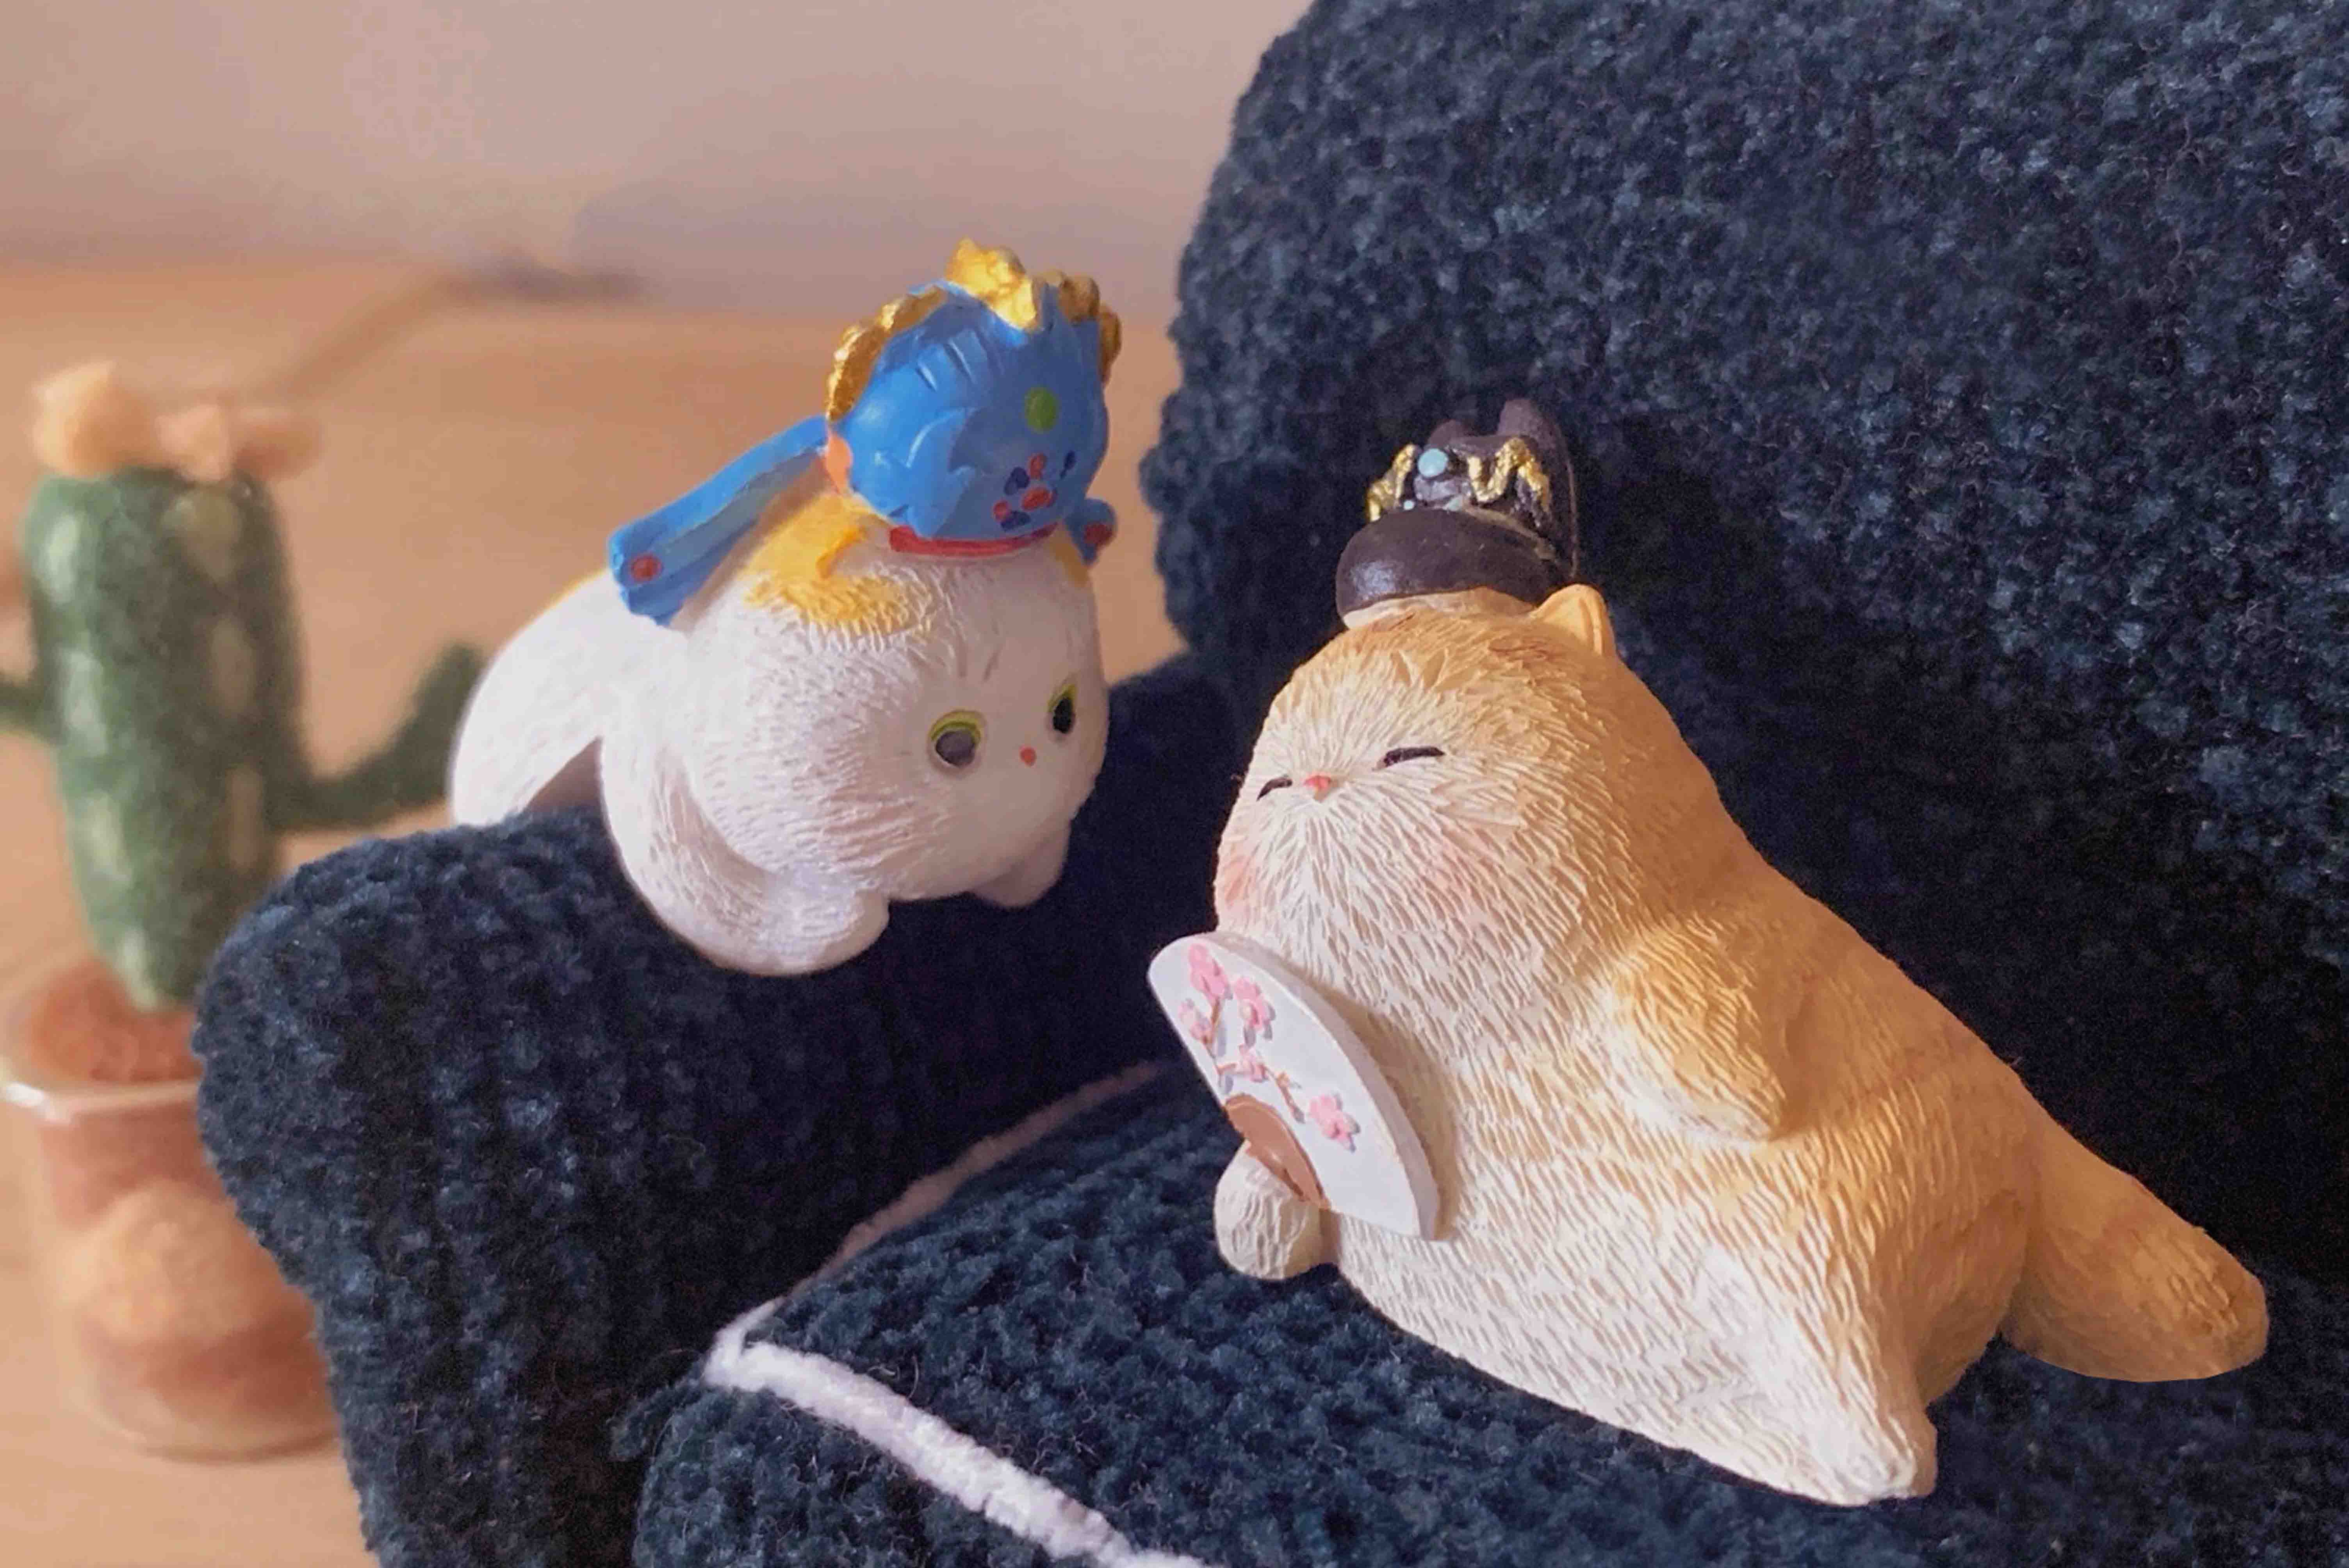 Cat's relaxing moments are spent lounging on the Handmade-Spinus Crochet Couch